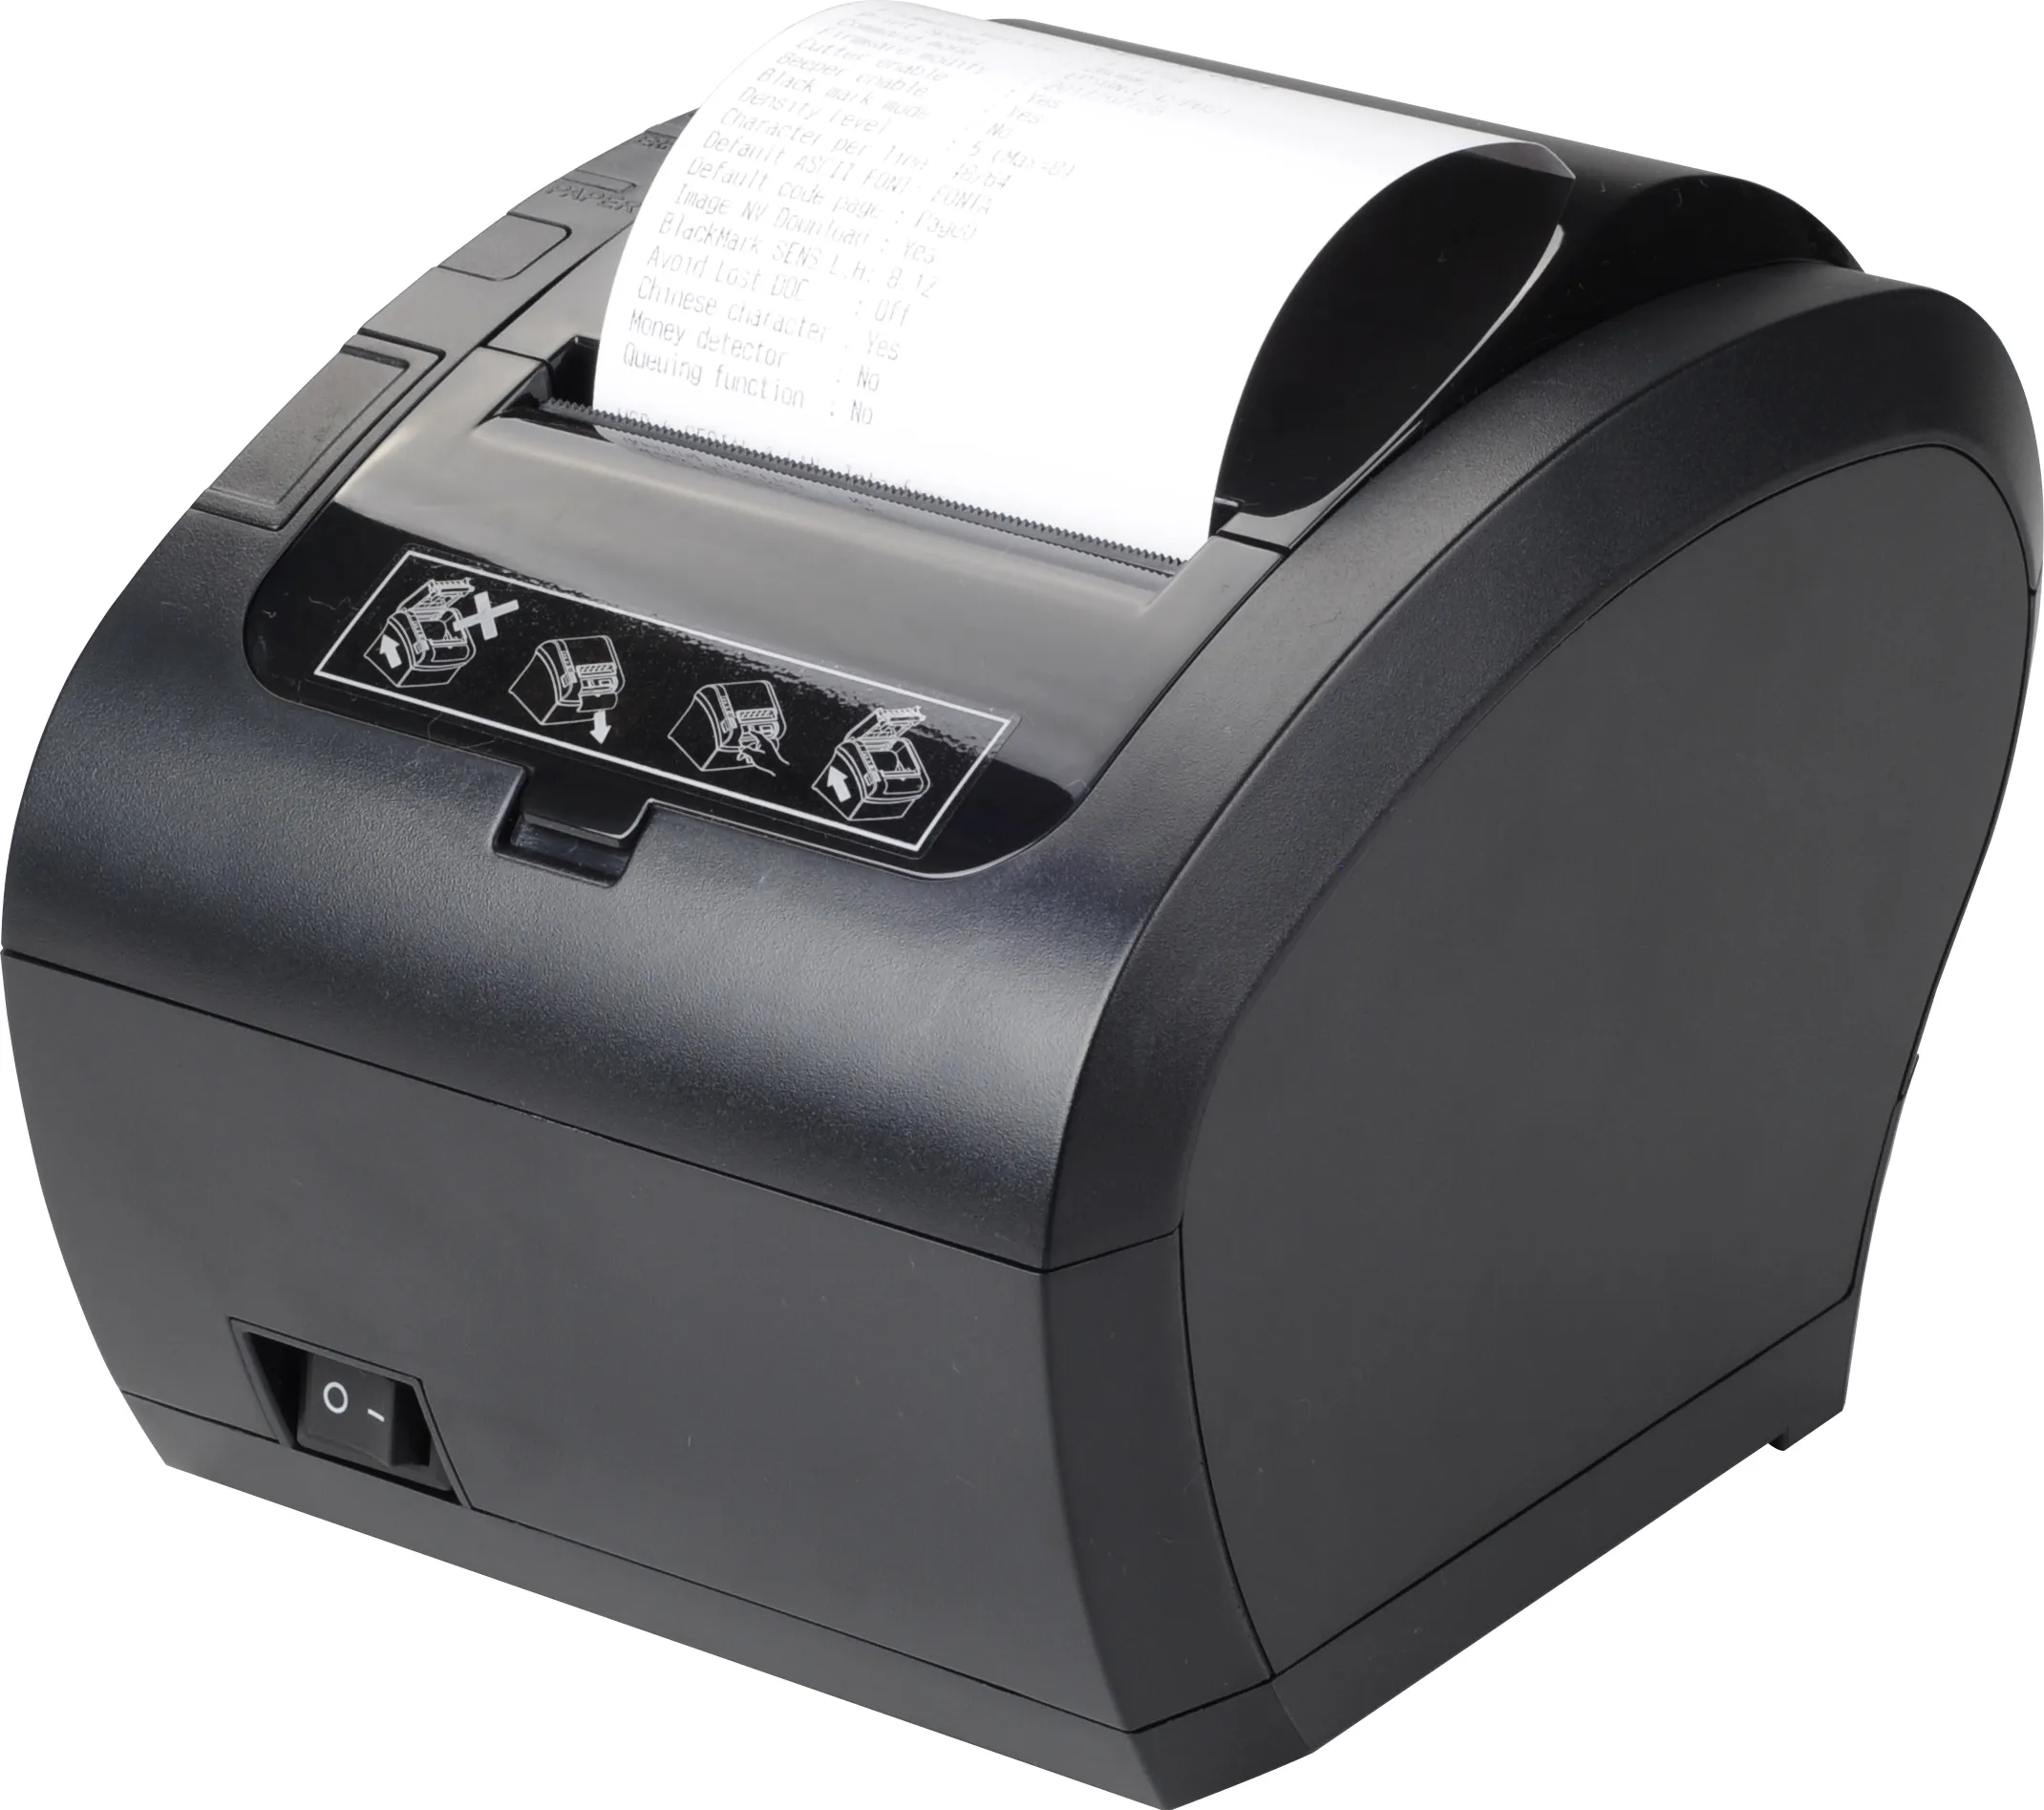 Hot Selling Android Hotel Phone Receipt Printer POS 58mm Thermal Printer Driver For Business